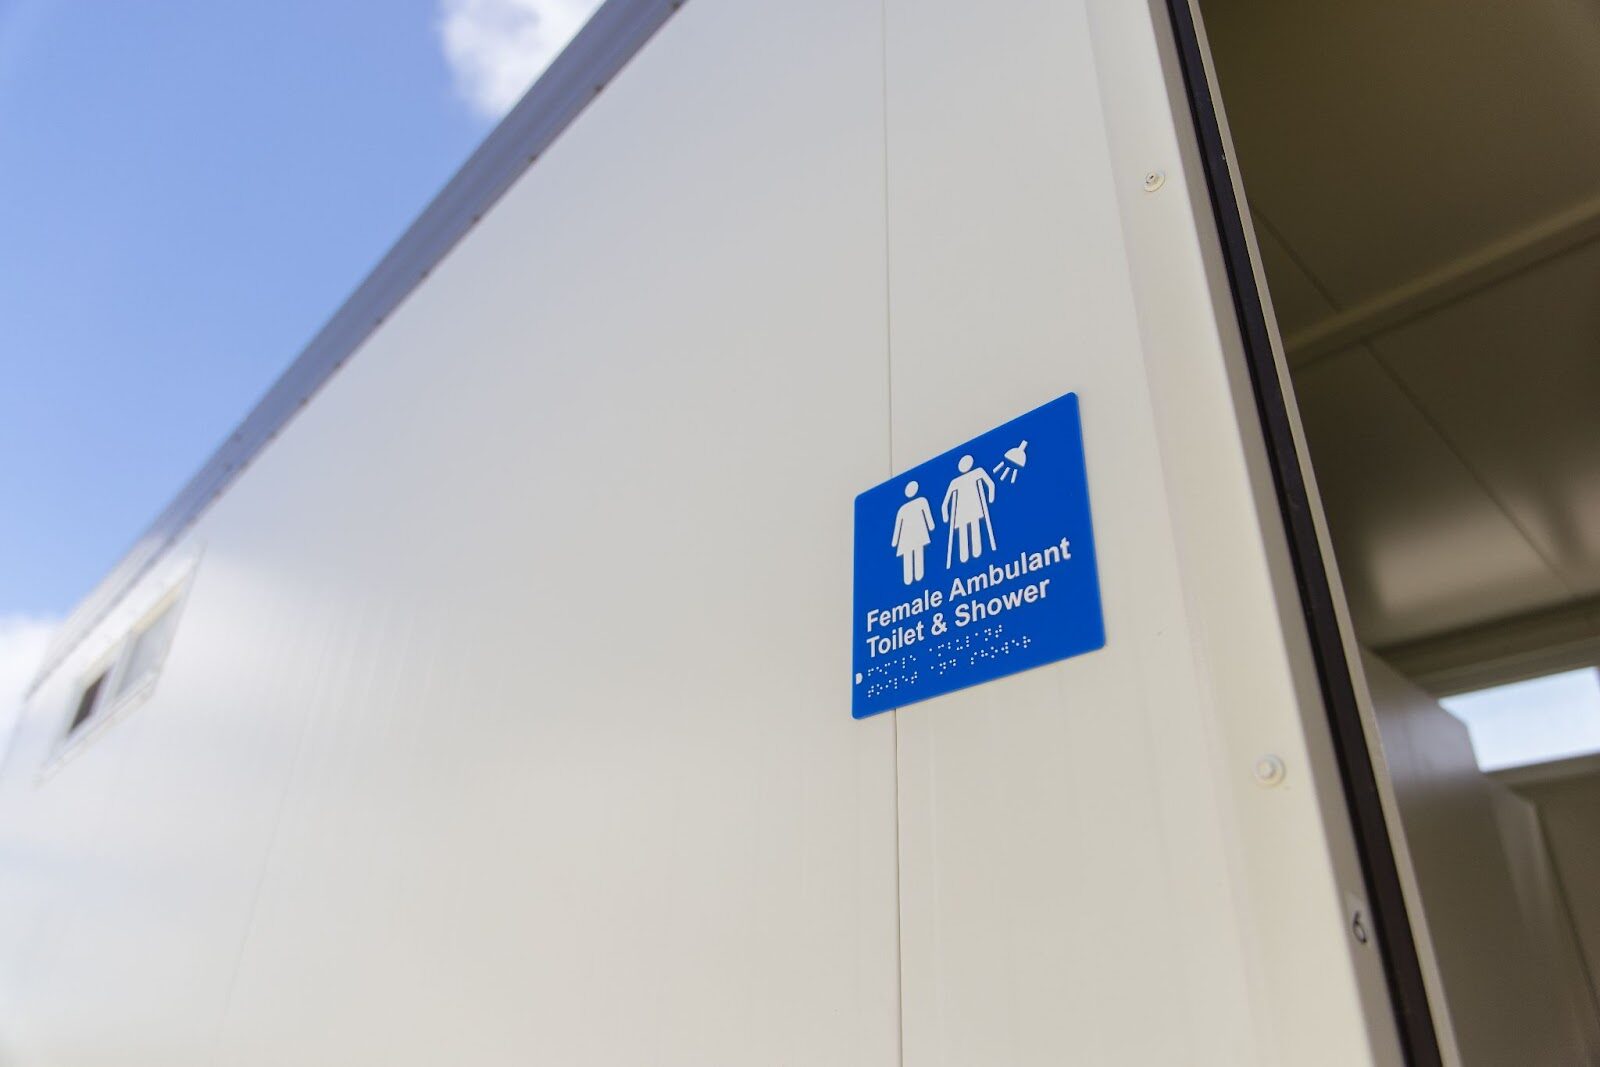 Close-up of a sign on a portable facility indicating Female Ambulant Toilet & Shower with accessibility symbols, mounted on a white exterior wall.